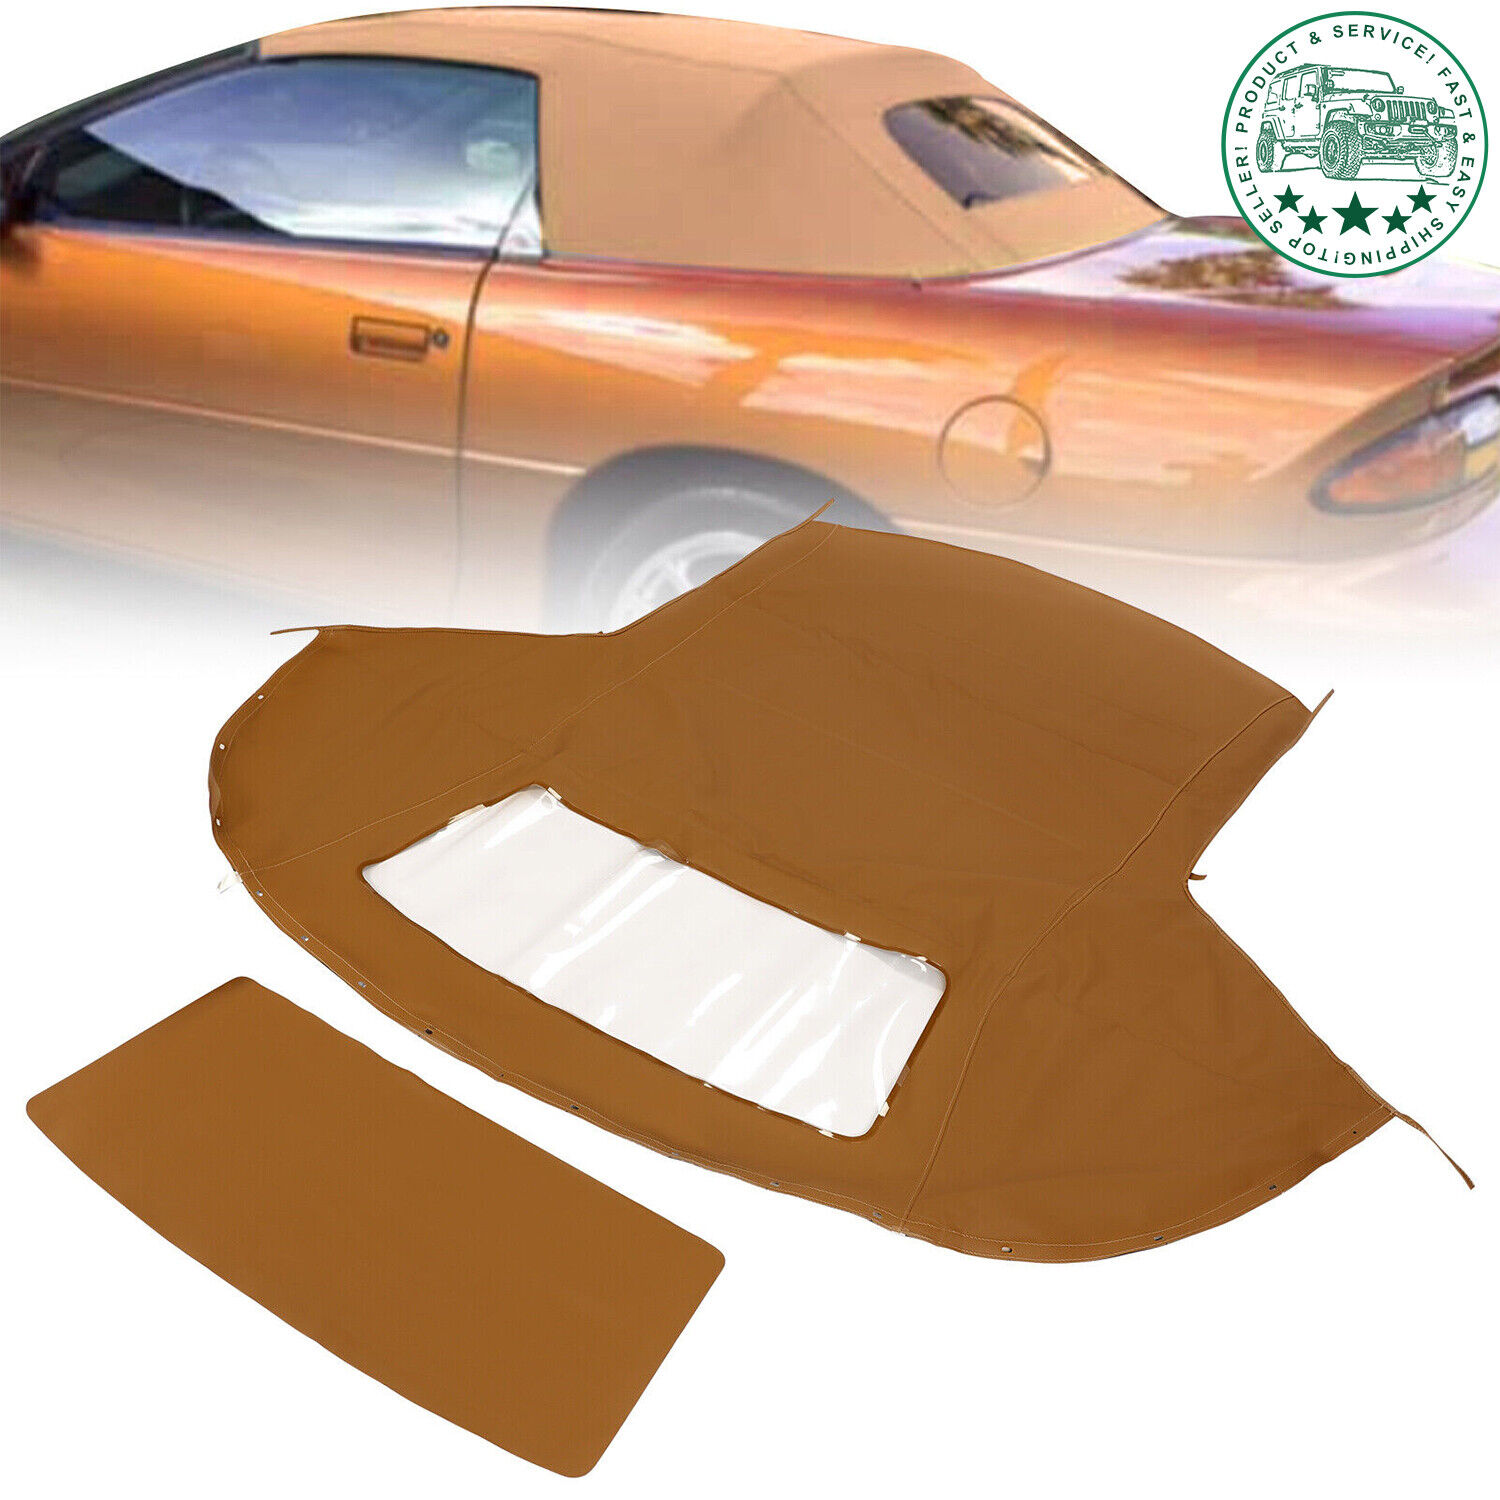 Tan Soft Top With Plastic Window For Chevrolet Camaro Convertible 1994-2002